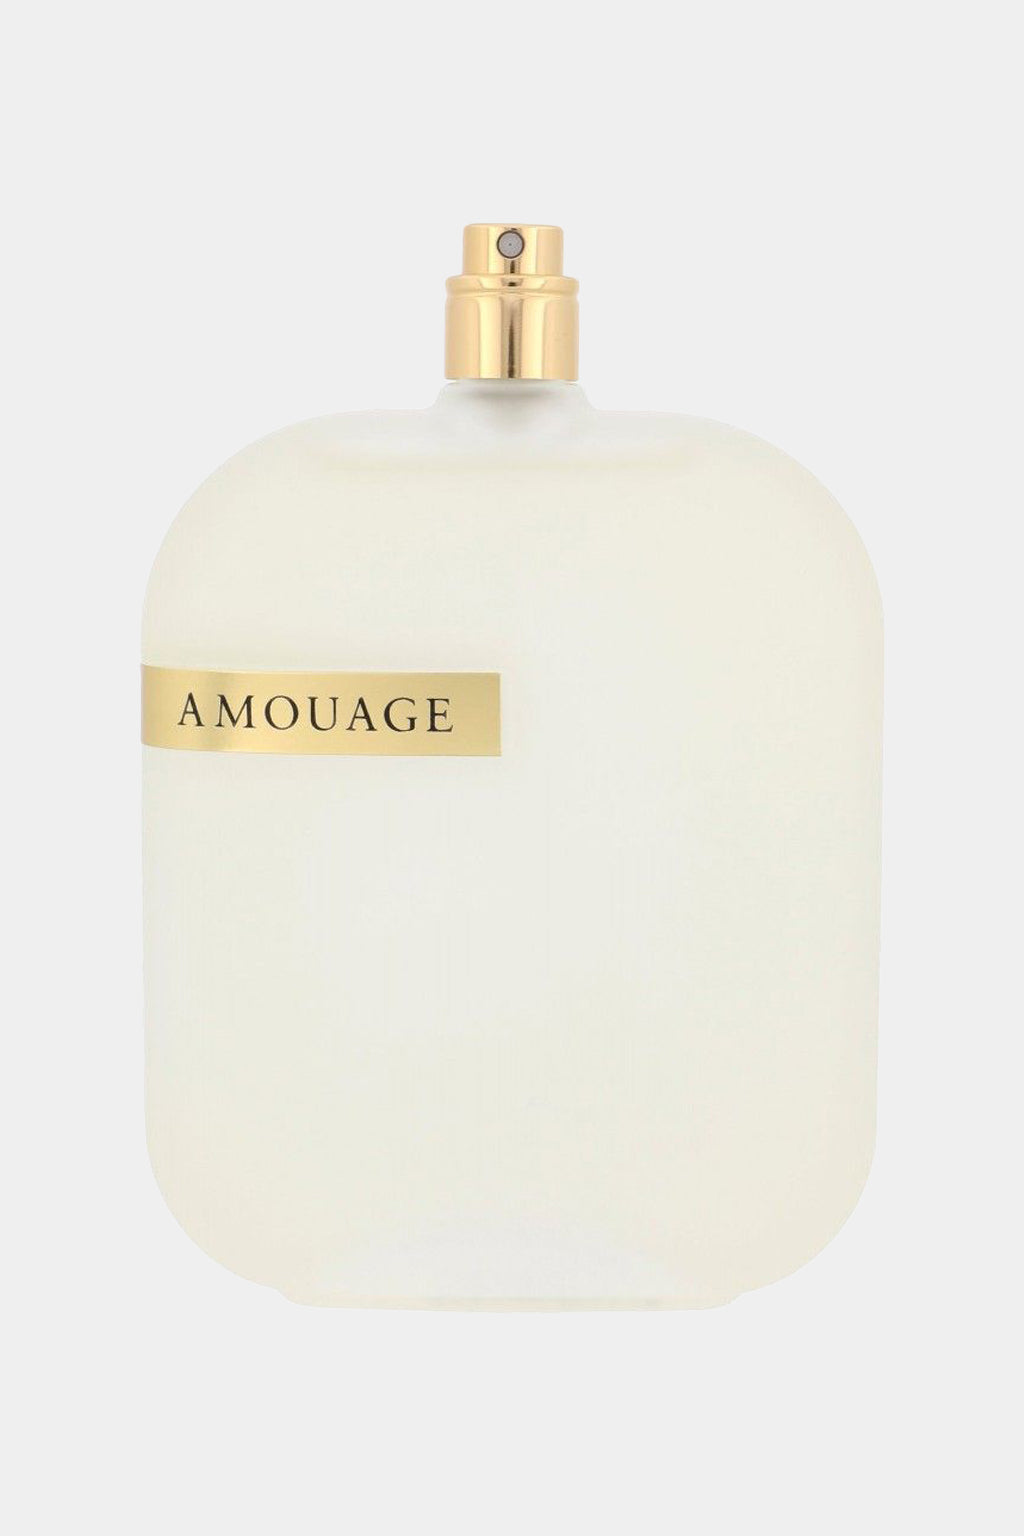 Amouage - The Library Collection Opus II